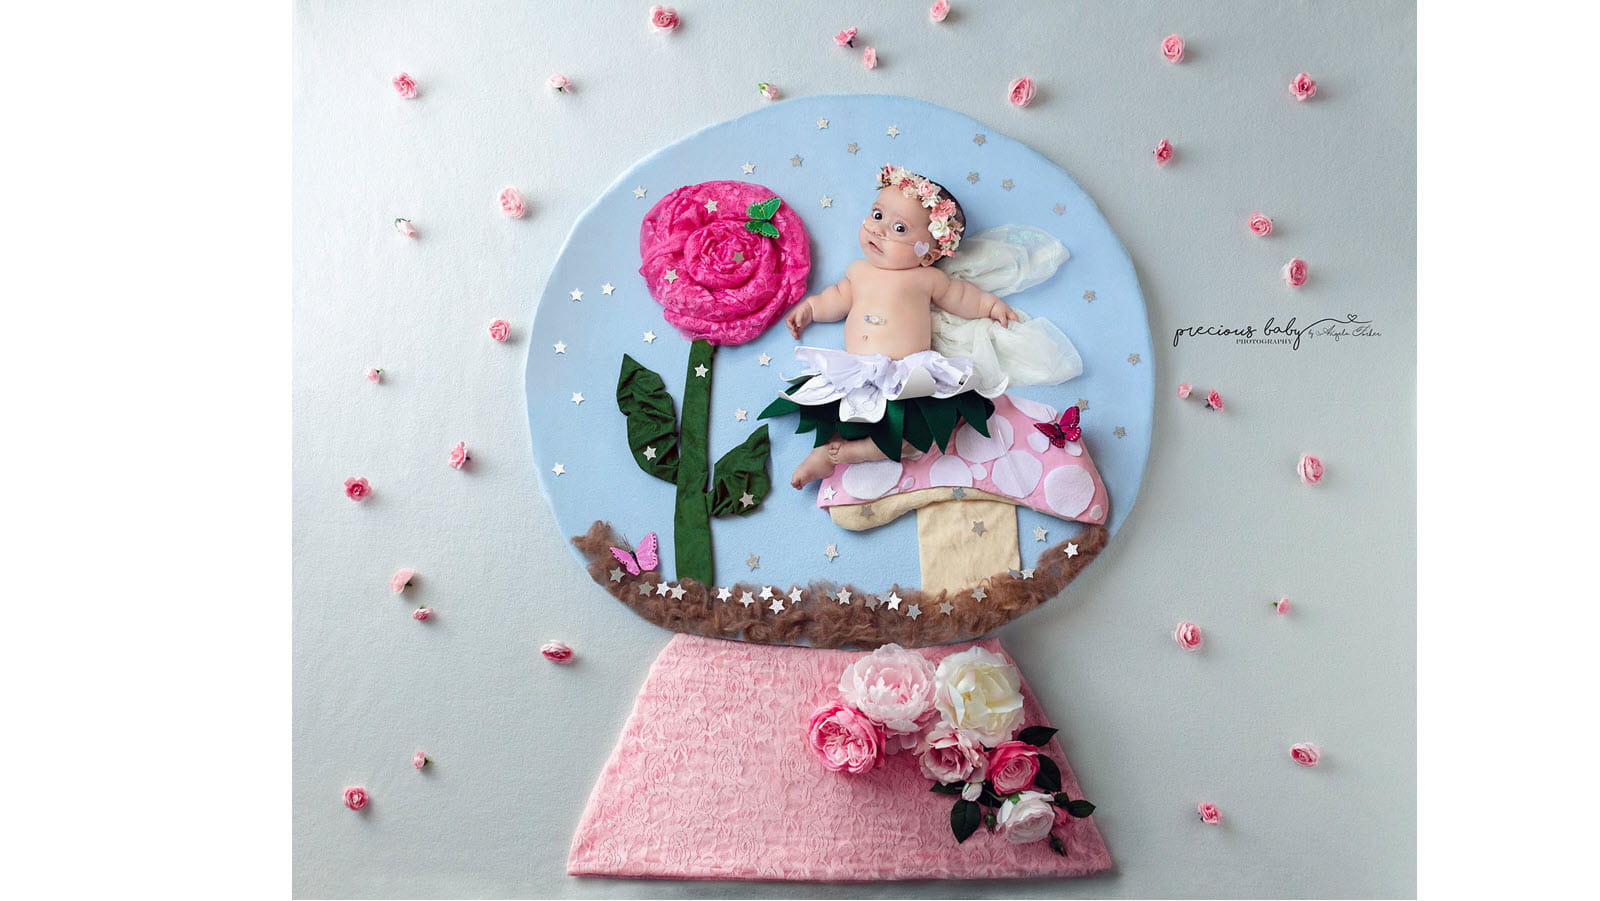 Baby dressed as a fairy wears a floral crown inside a snow globe scene